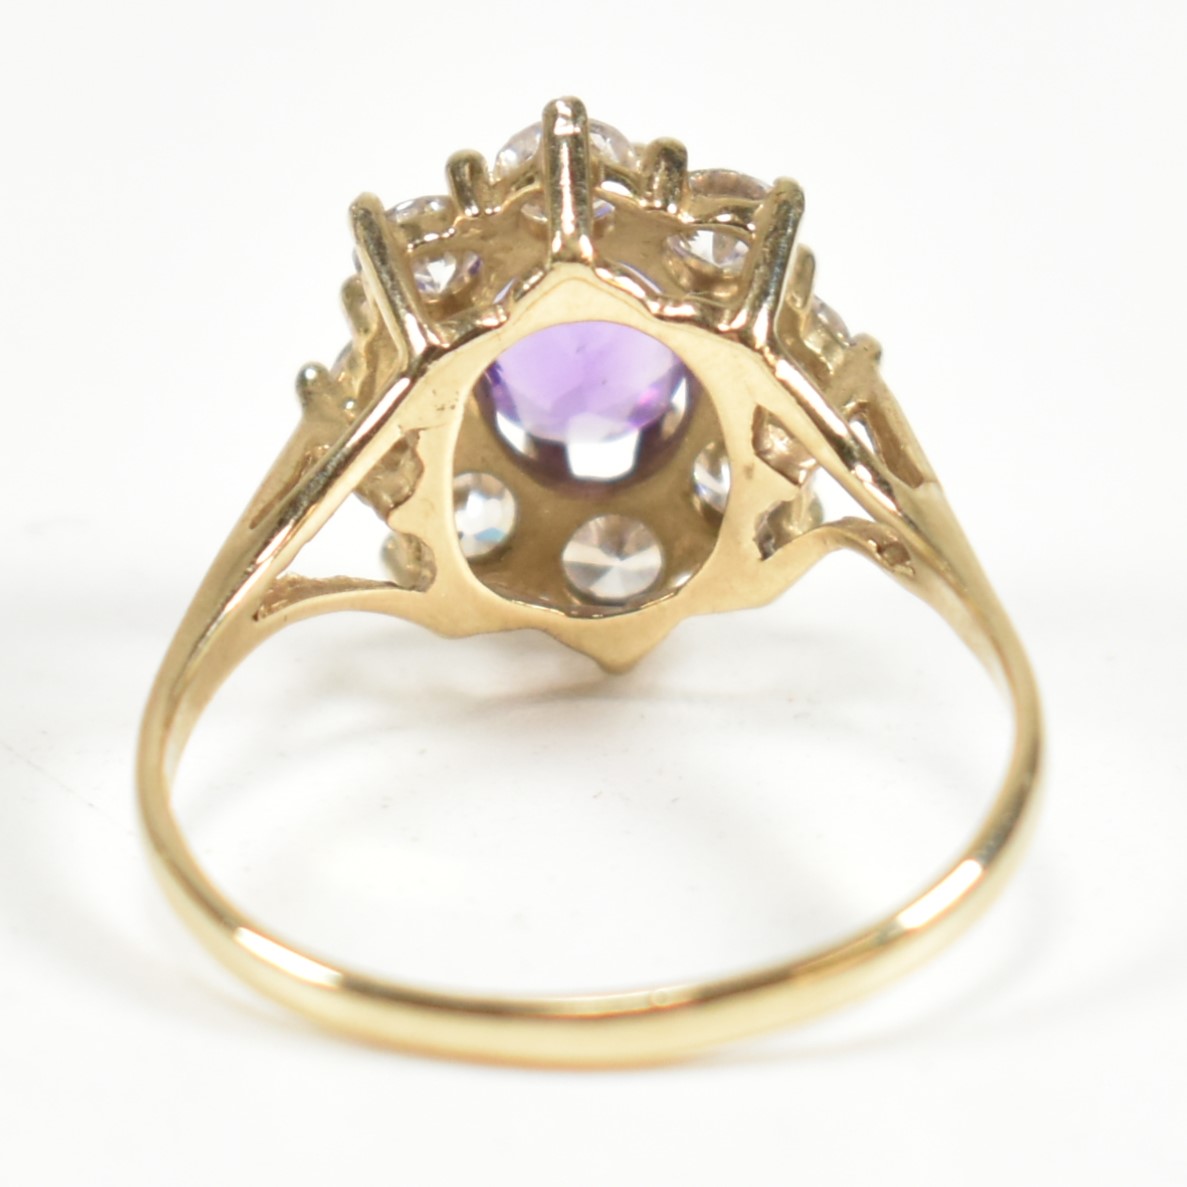 HALLMARKED 9CT GOLD AMETHYST & WHITE STONE CLUSTER RING - Image 3 of 9